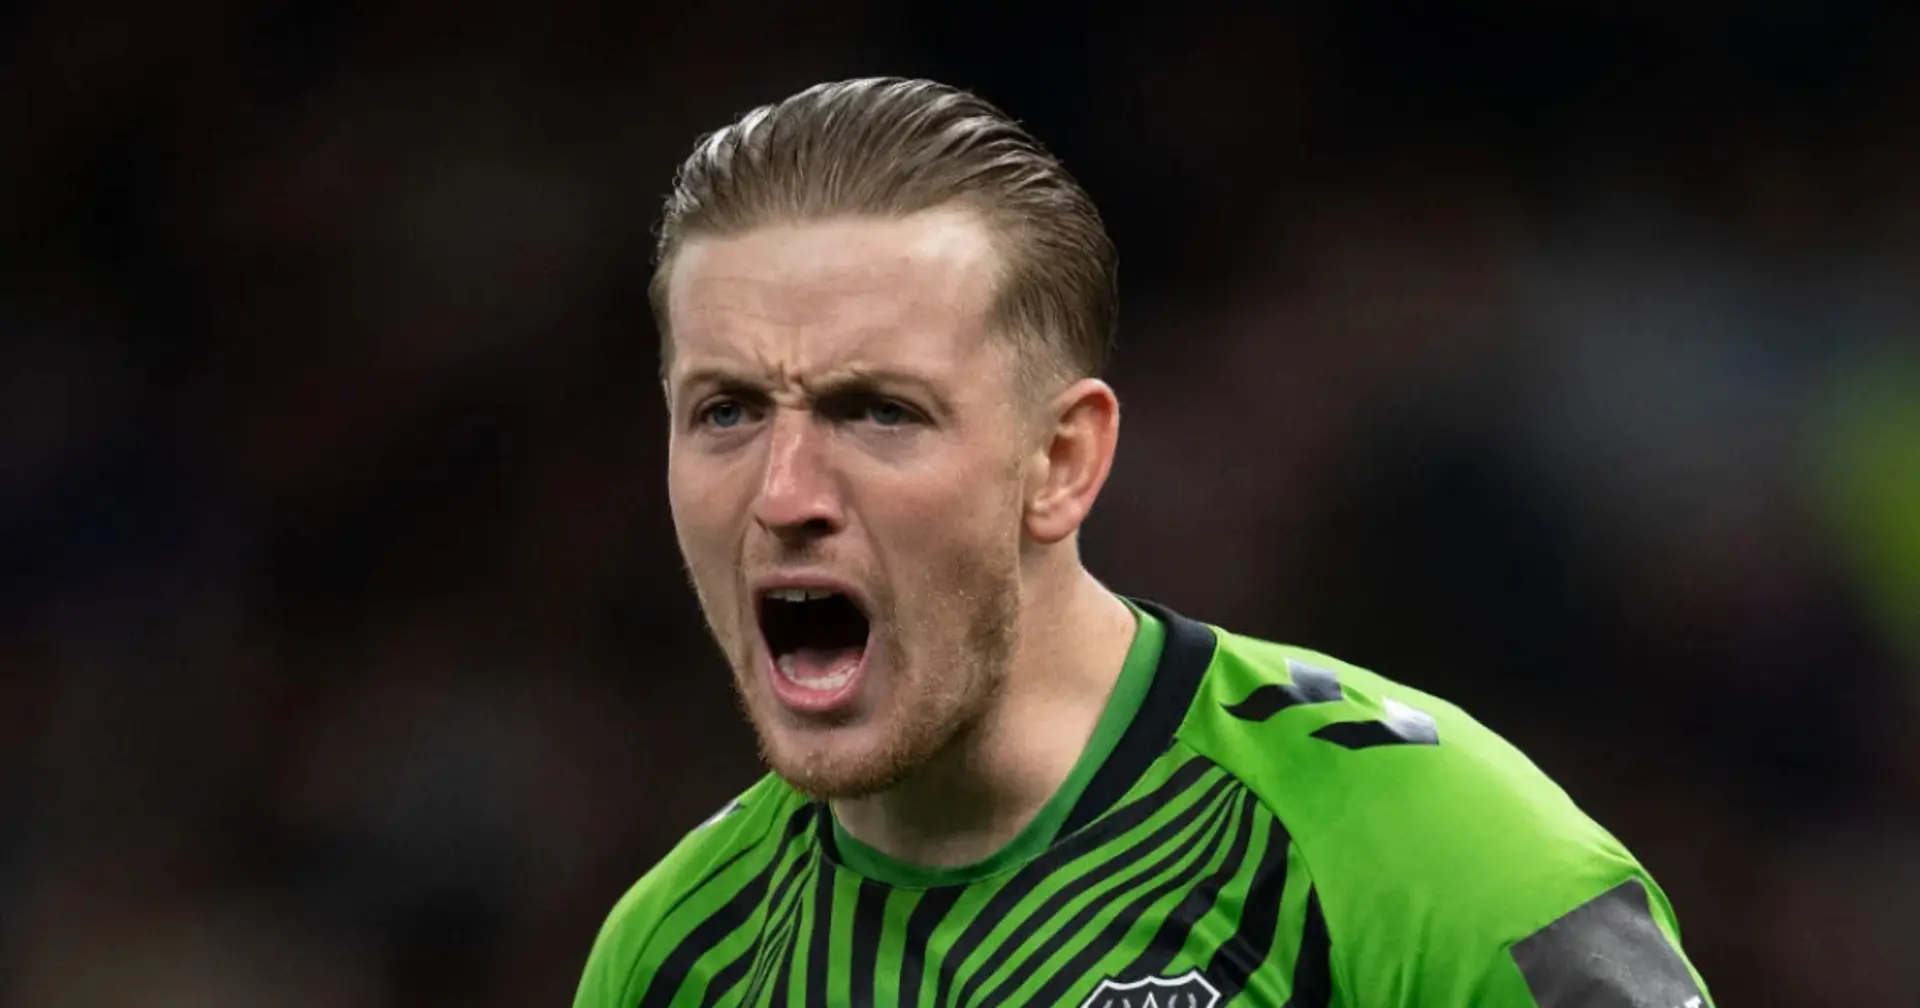 Chelsea to scout Pickford at World Cup as alternative to Potter's preferred options (reliability: 4 stars)